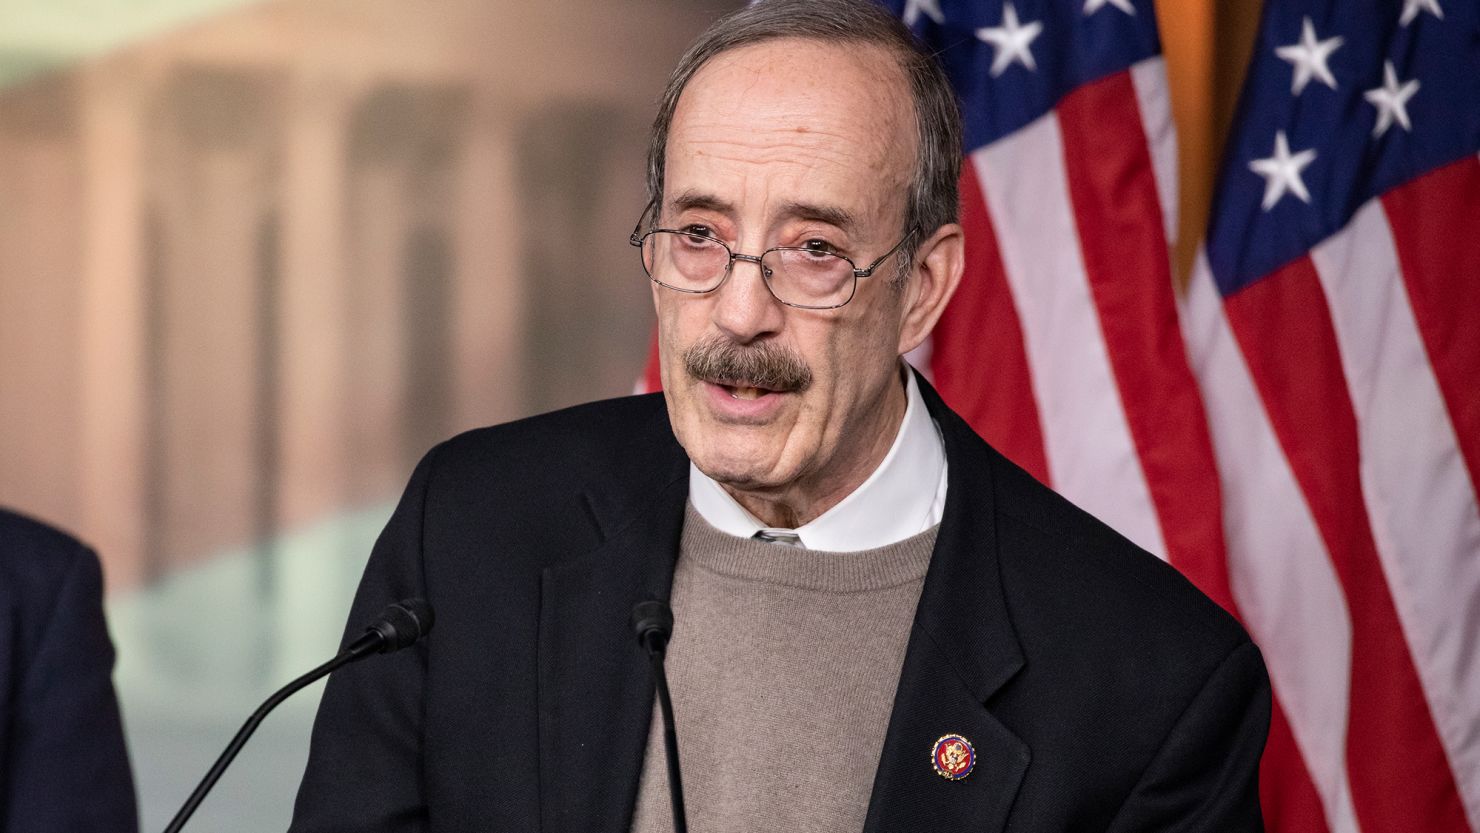 In this January 28, 2020, file photo, Rep. Eliot Engel, D-NY, speaks   in Washington. 